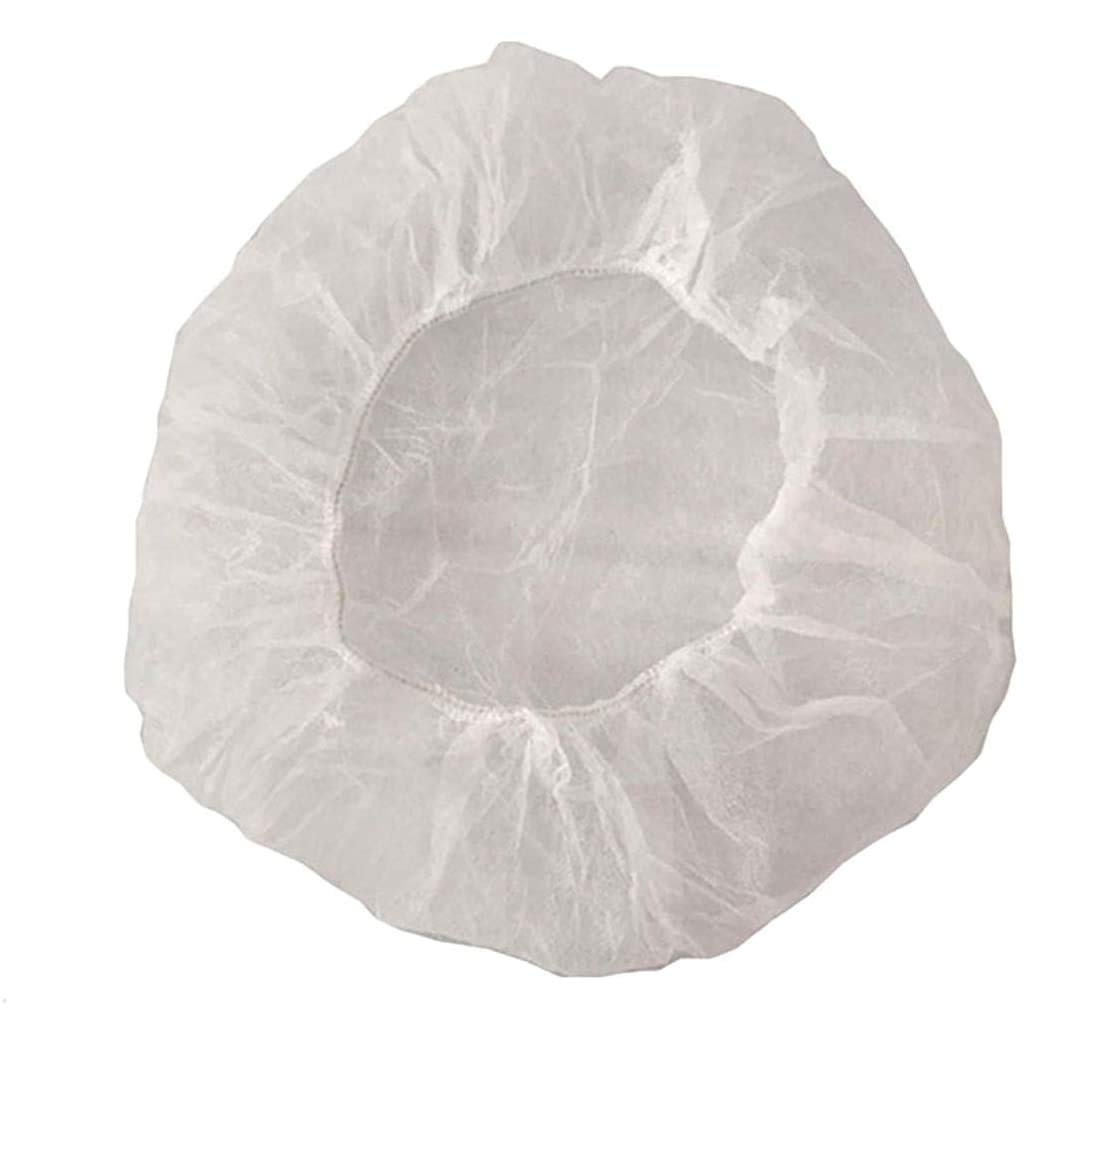 ZMDREAM Case of 1000 Disposable Bouffant Cap Hair Cover 24 Inch White